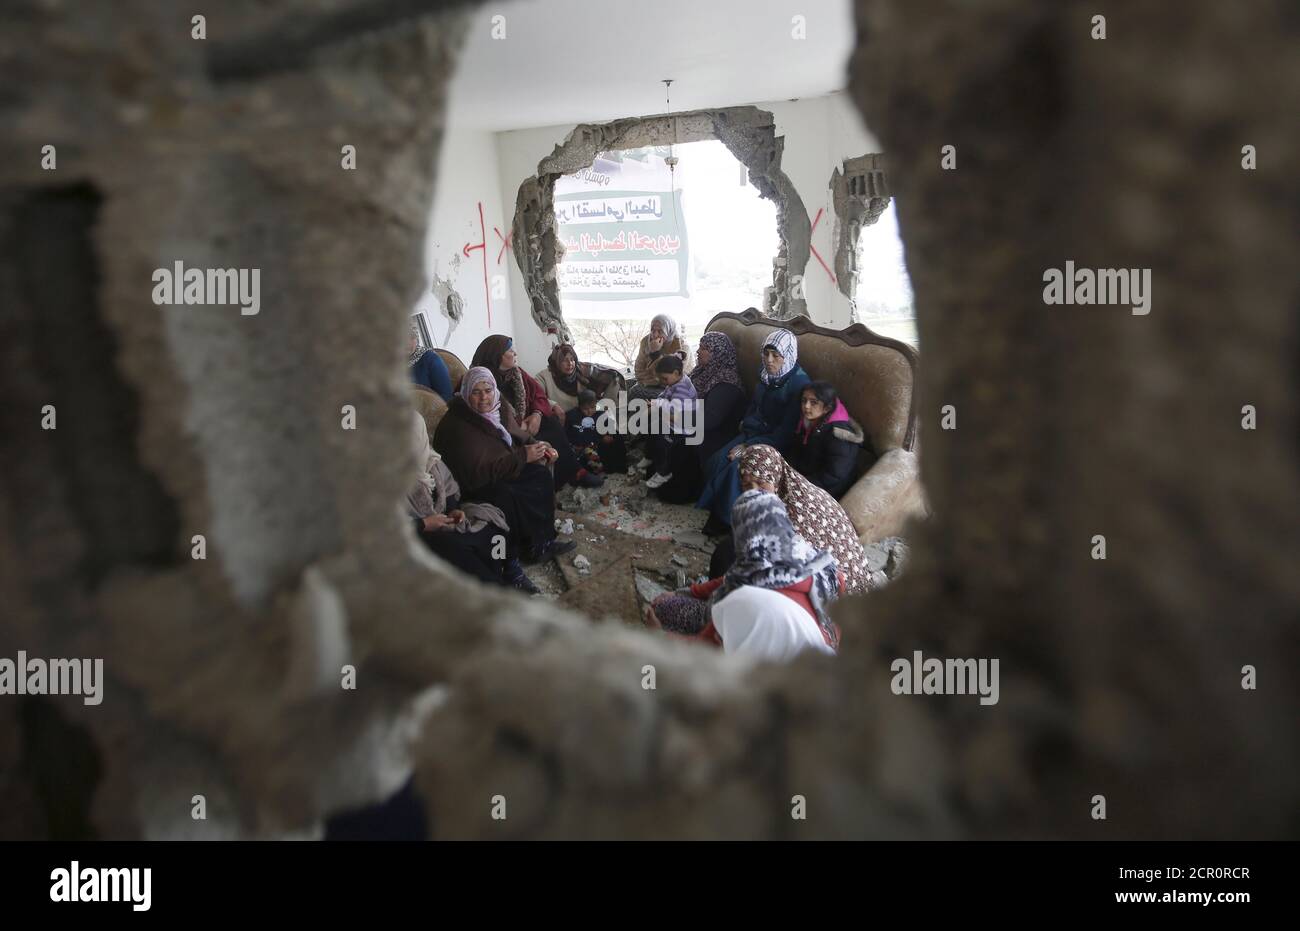 Palestinians gather in the home of Mohammed al-Haroub after it was partially demolished by Israeli army in the West Bank village of Dir Samt, south of Hebron February 23, 2016.  Israeli army bulldozers on Tuesday demolished the homes of two Palestinians who killed five people in attacks in the occupied West Bank and Israel last year, the military said. Mohammed al-Haroub shot at cars near an Israeli settlement bloc in the West Bank on Nov. 20, the military said, killing an Israeli, an American student and a Palestinian. REUTERS/Mussa Qawasma Stock Photo